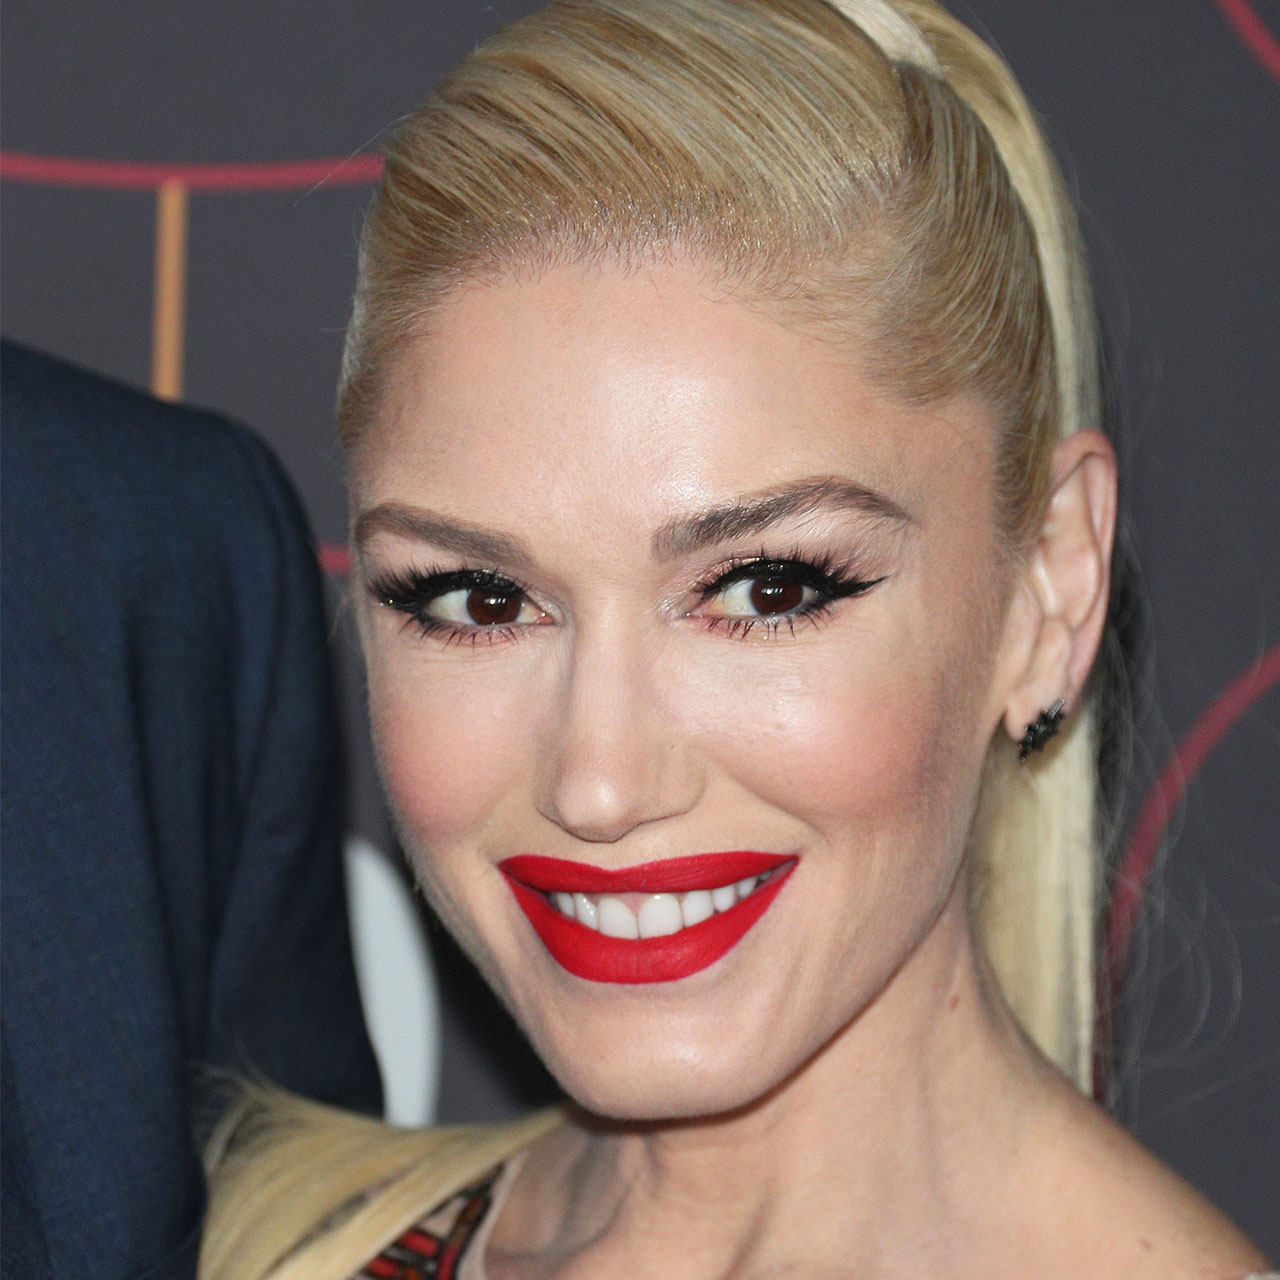 Gwen Stefani Supports Blake Shelton In A Chic Patterned Blazer For Her Husband's Ole Red Bar Opening